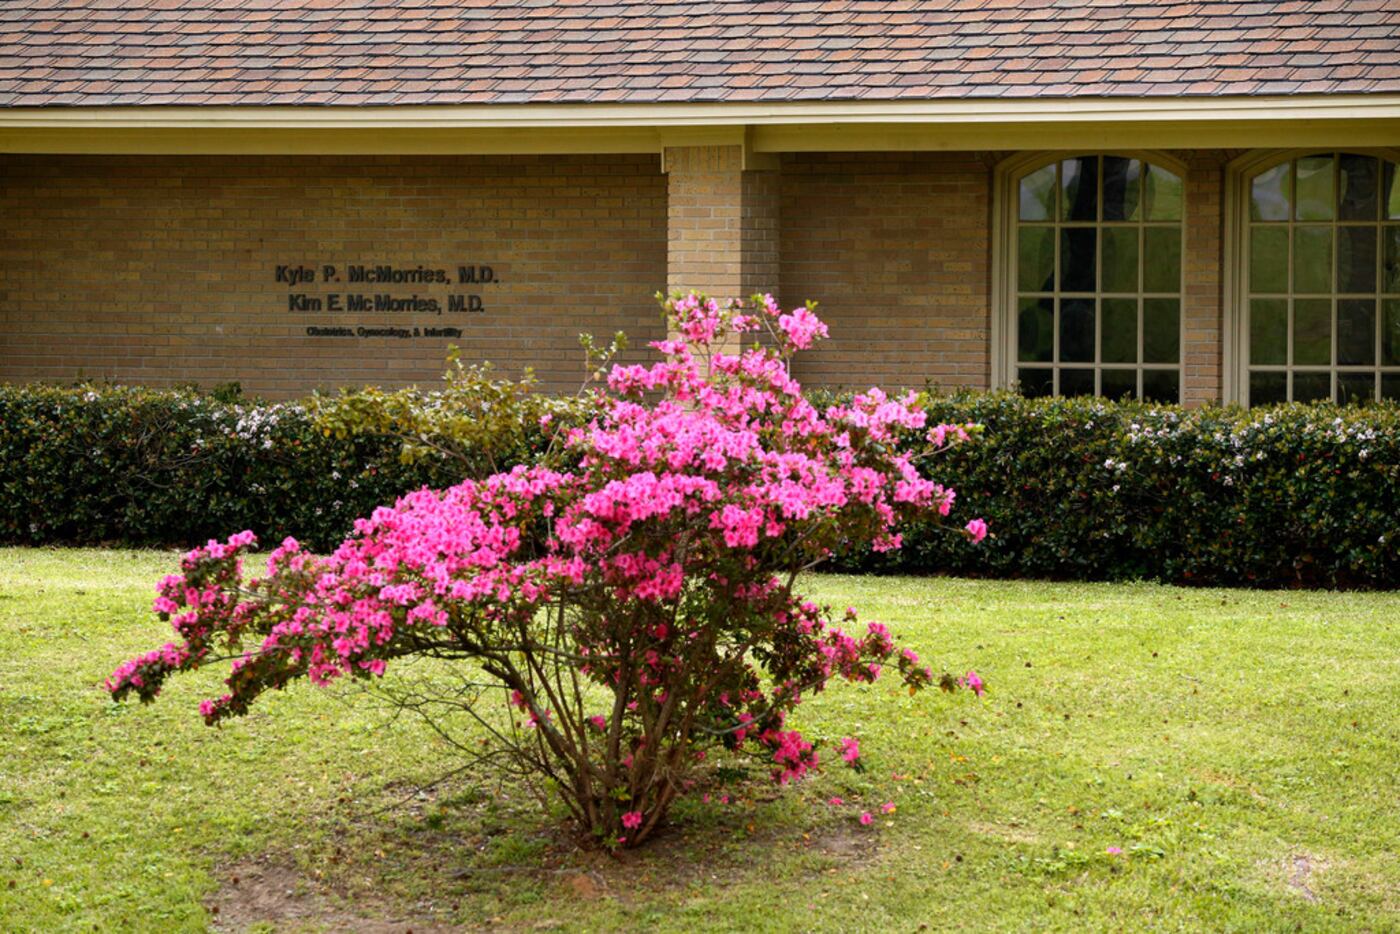 The McMorries Obstetrics, Gynecology & Infertility office in Nacogdoches.